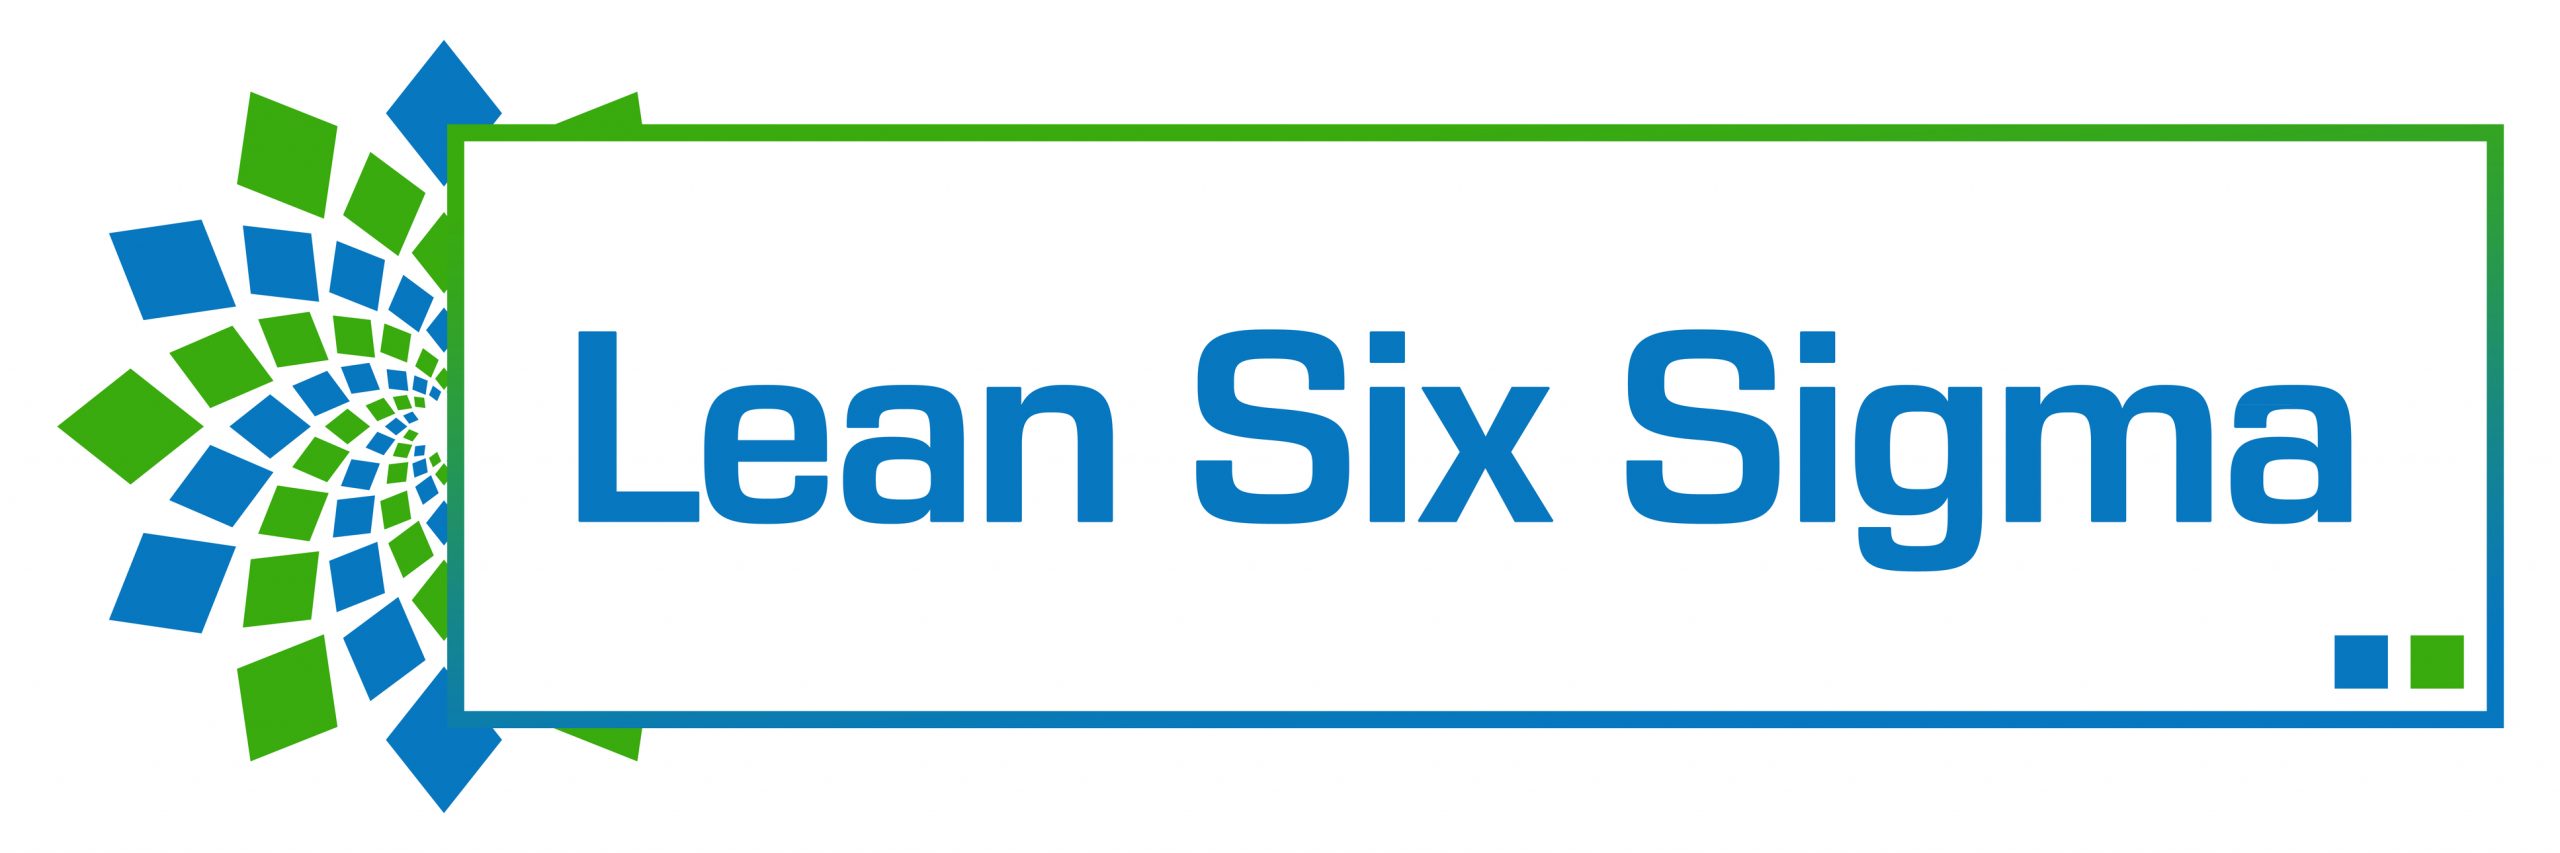 success story about lean six sigma